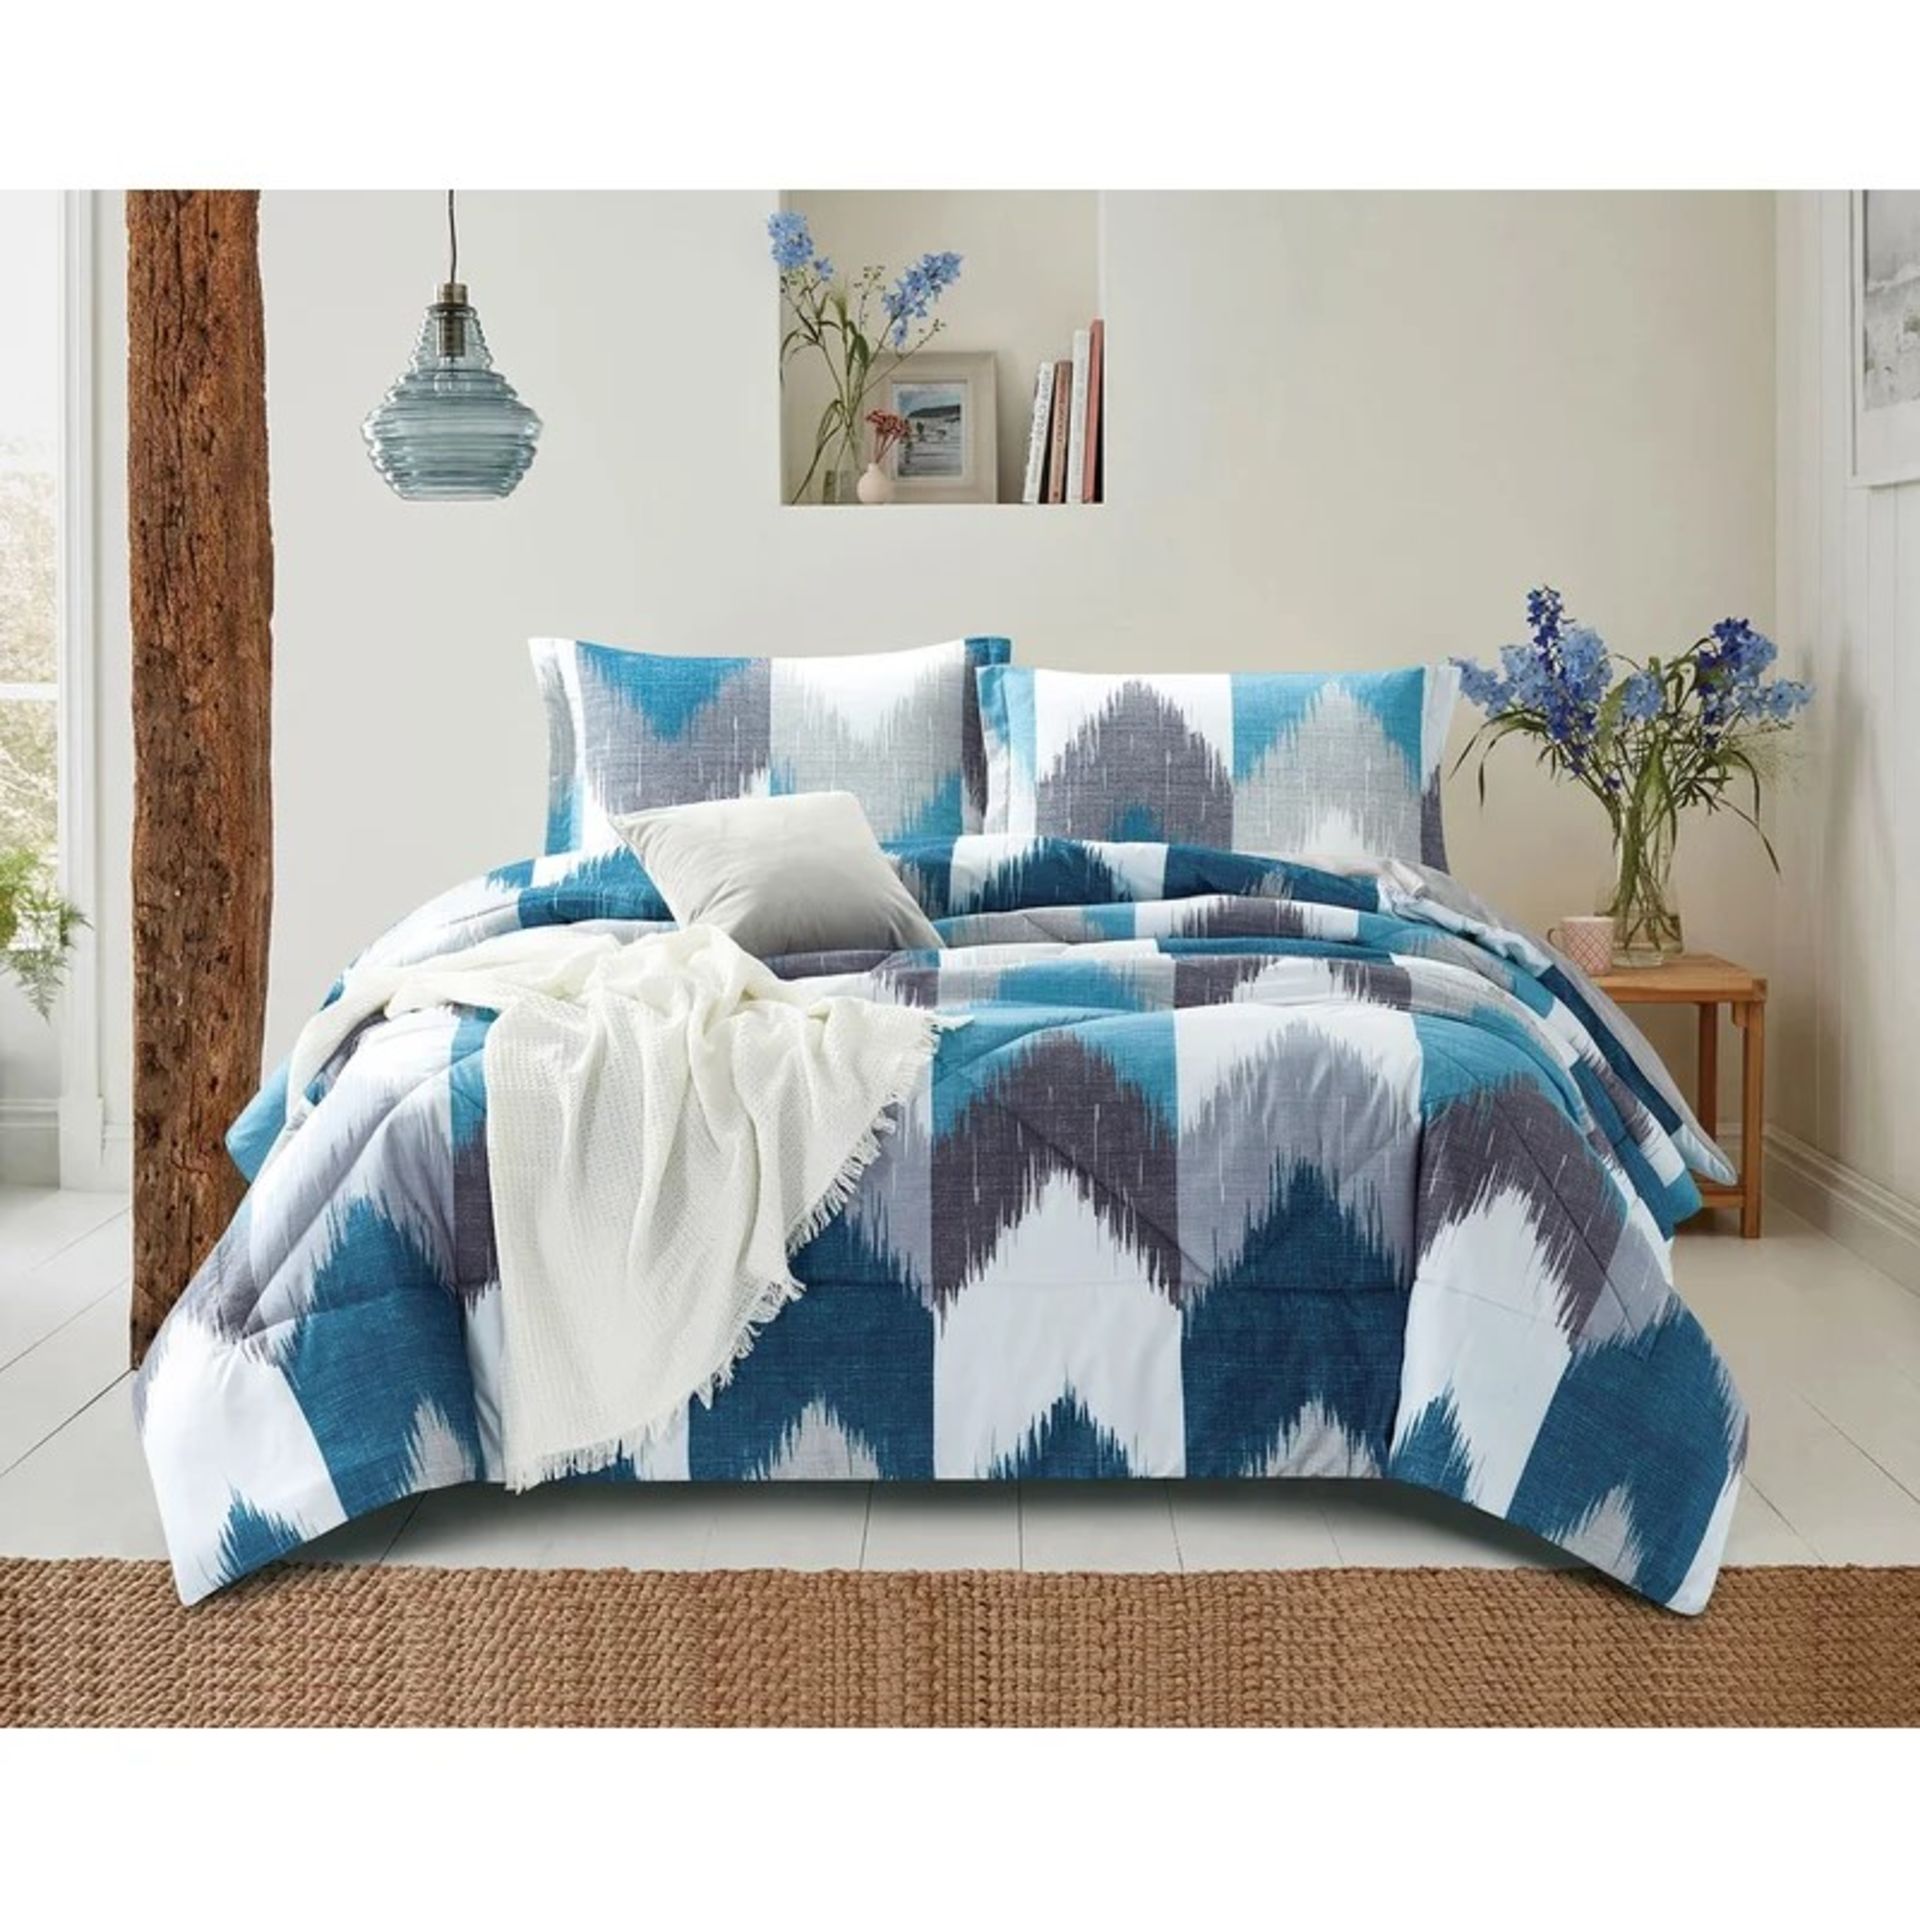 RRP £56.99 - 3FT Single Durango Bedspread Set with a pillow - Image 2 of 2